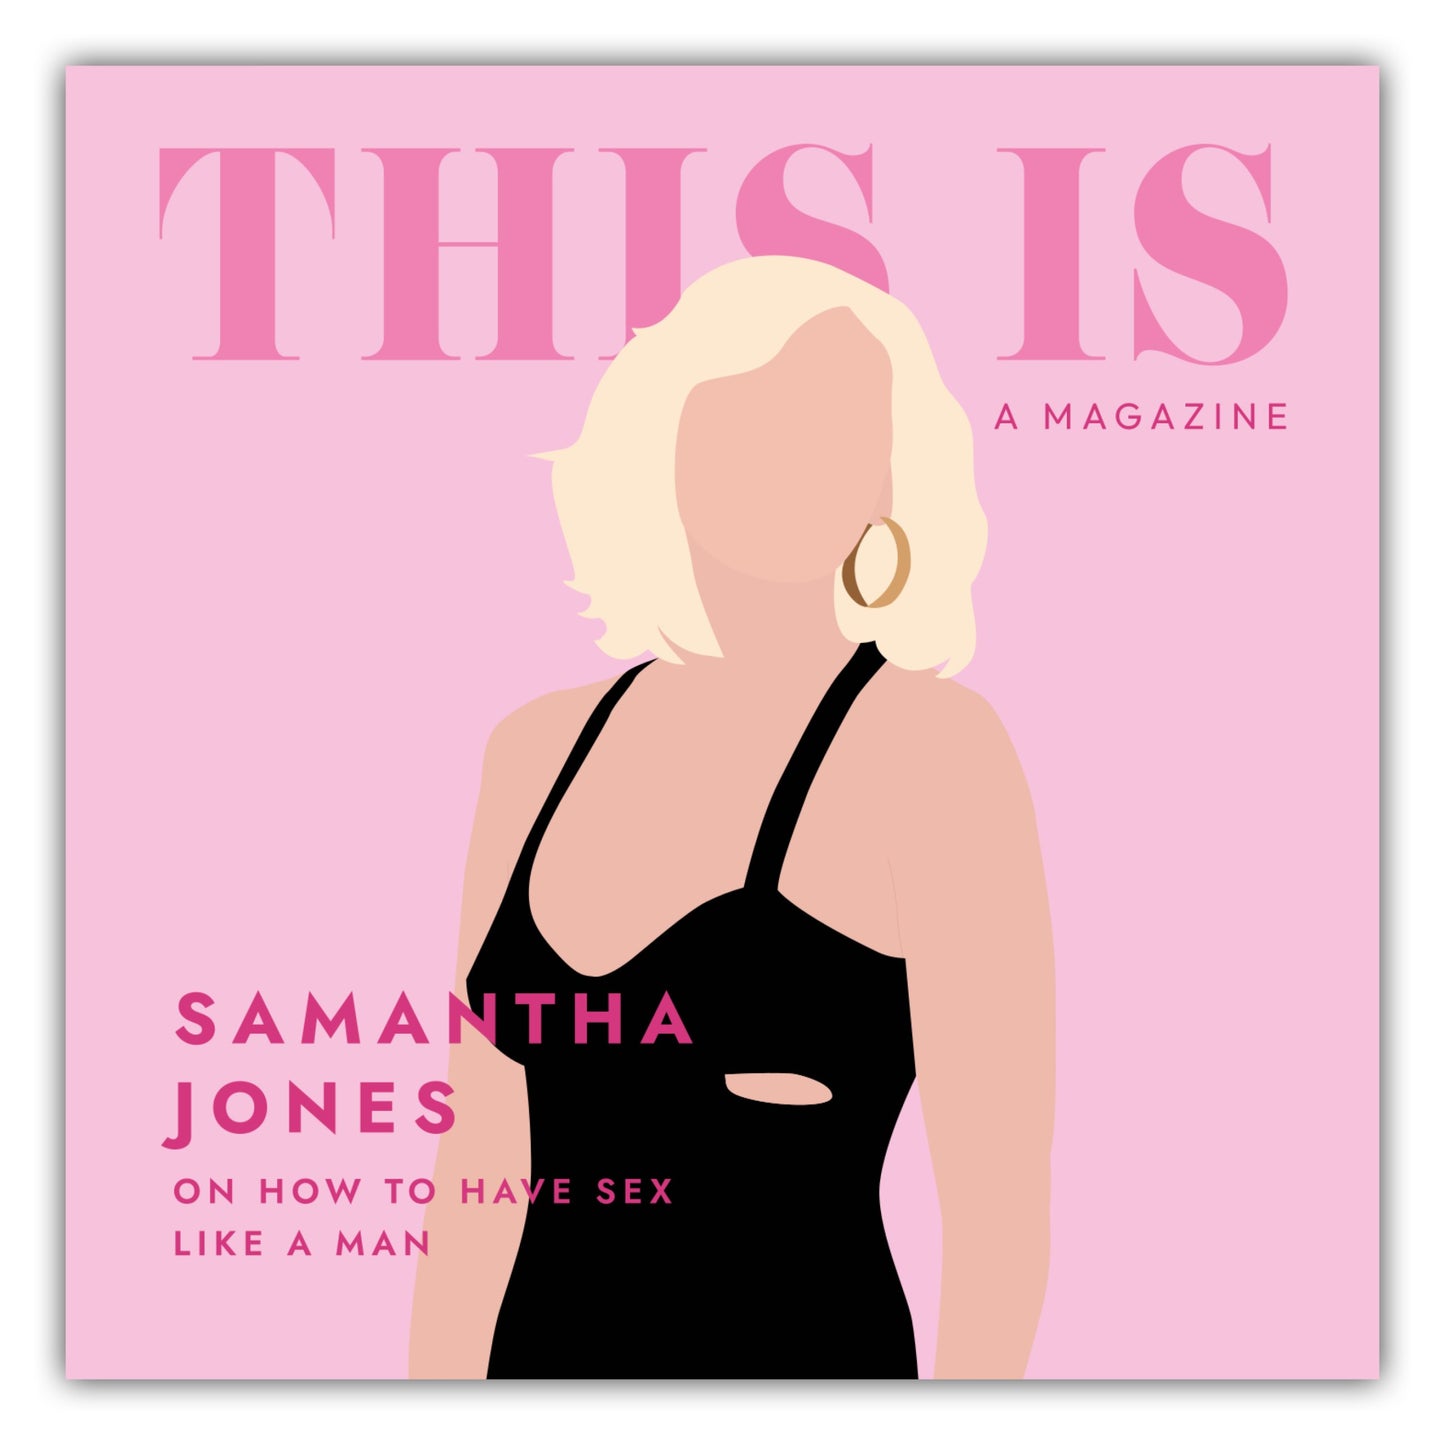 Poster Sex And The City - This Is A Magazine - Samantha Jones